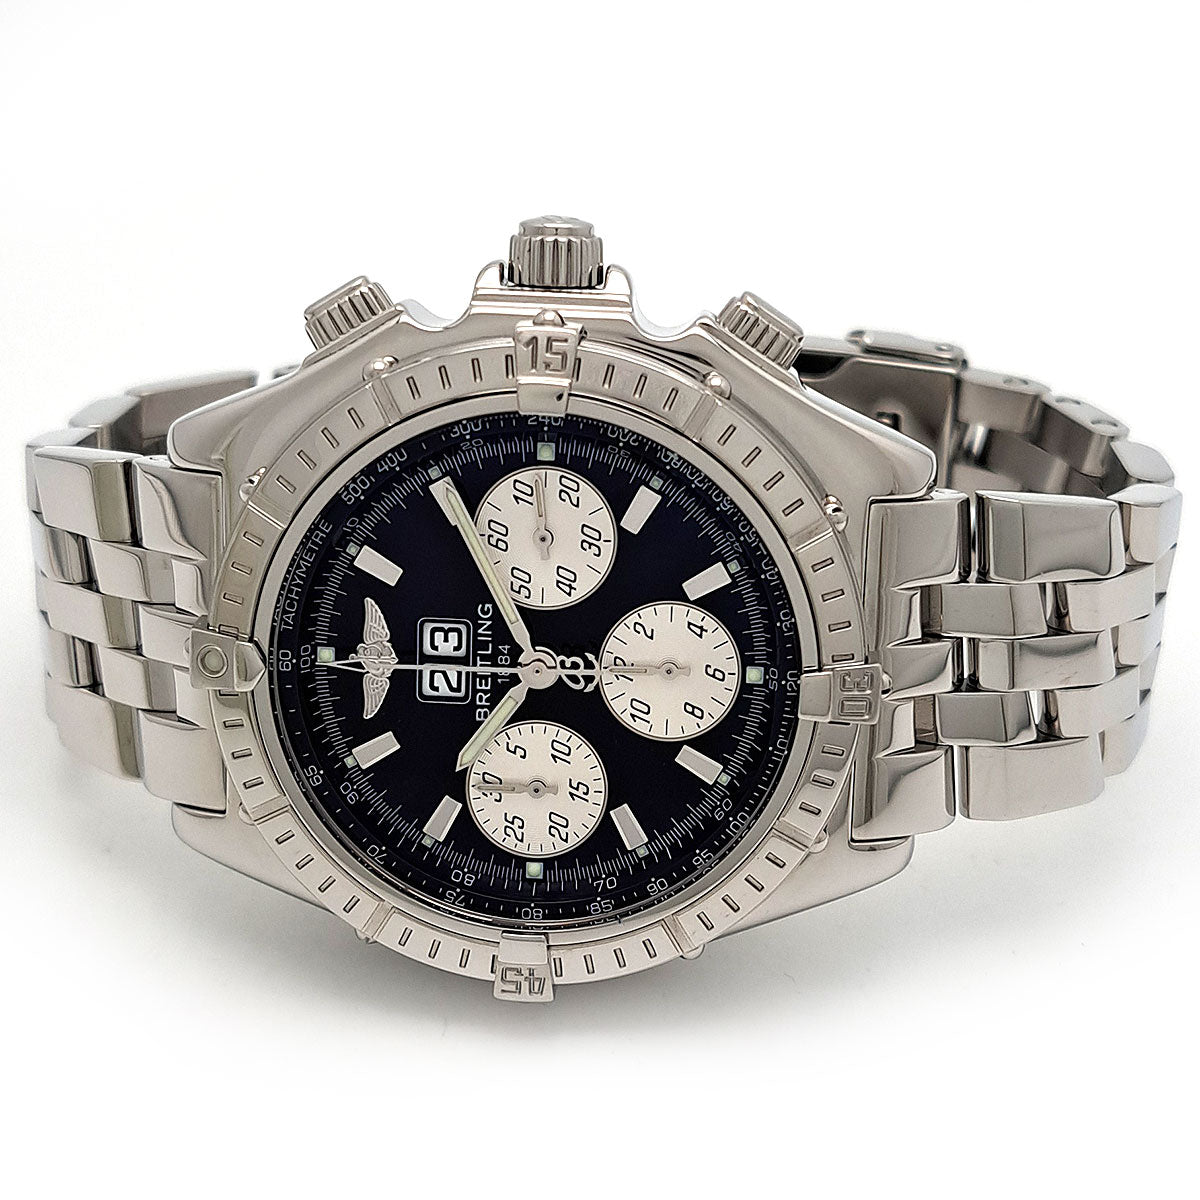 Breitling Crosswind Special A44355 Automatic Watch, Stainless Steel, Men's (Pre-owned) A44355